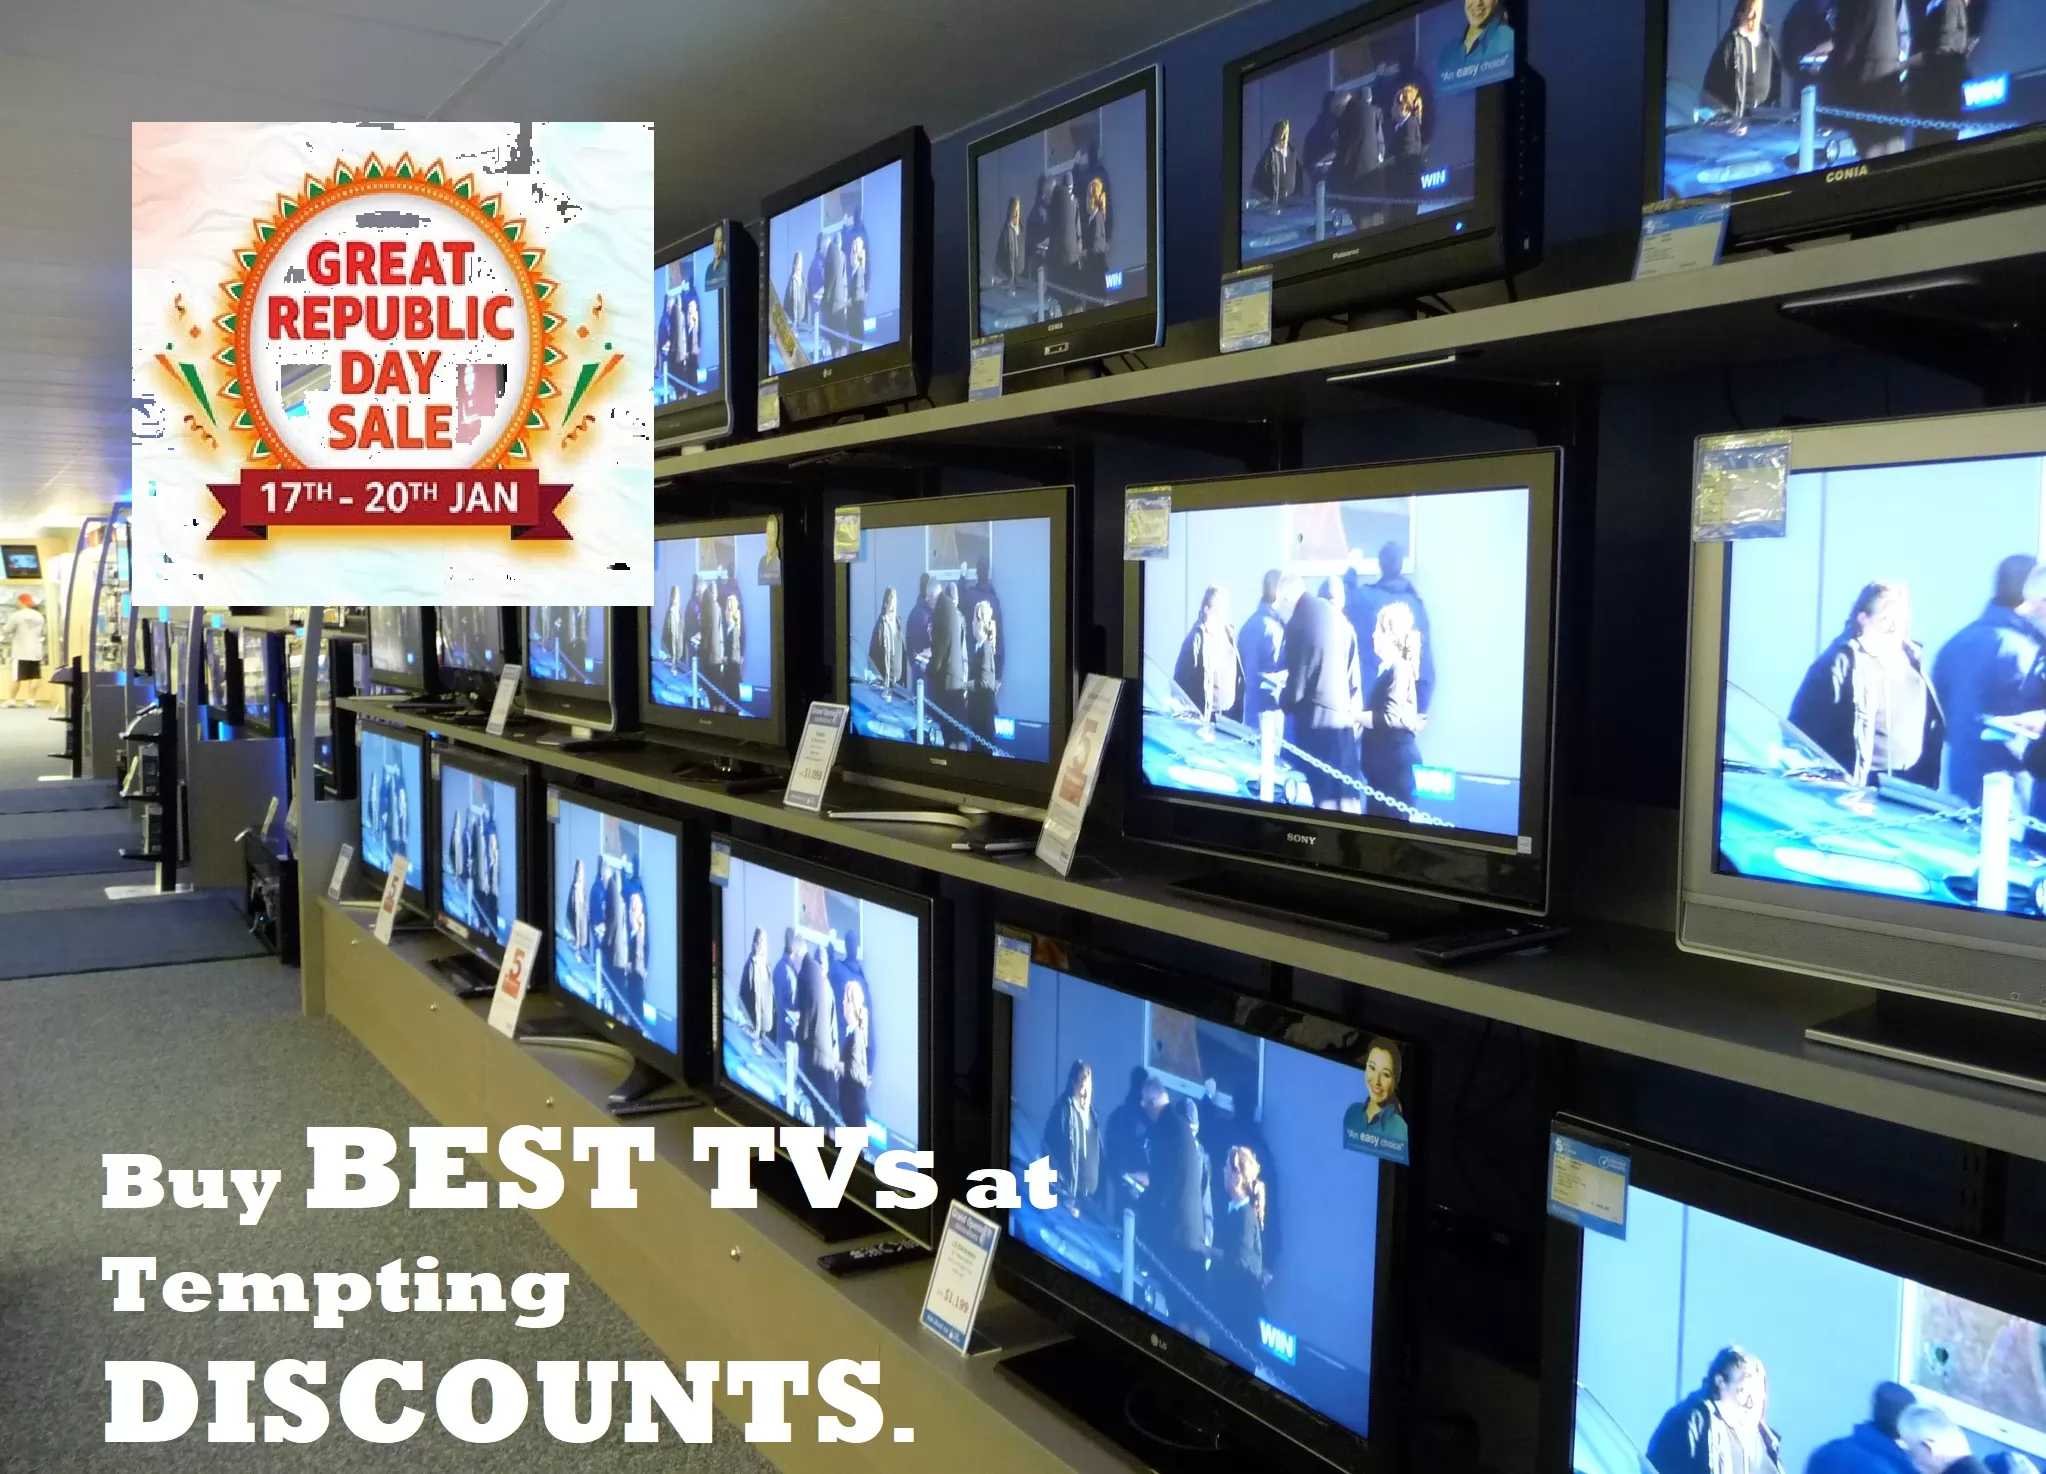 Top 10 TV Offers on Amazon Great Republic Day Sale